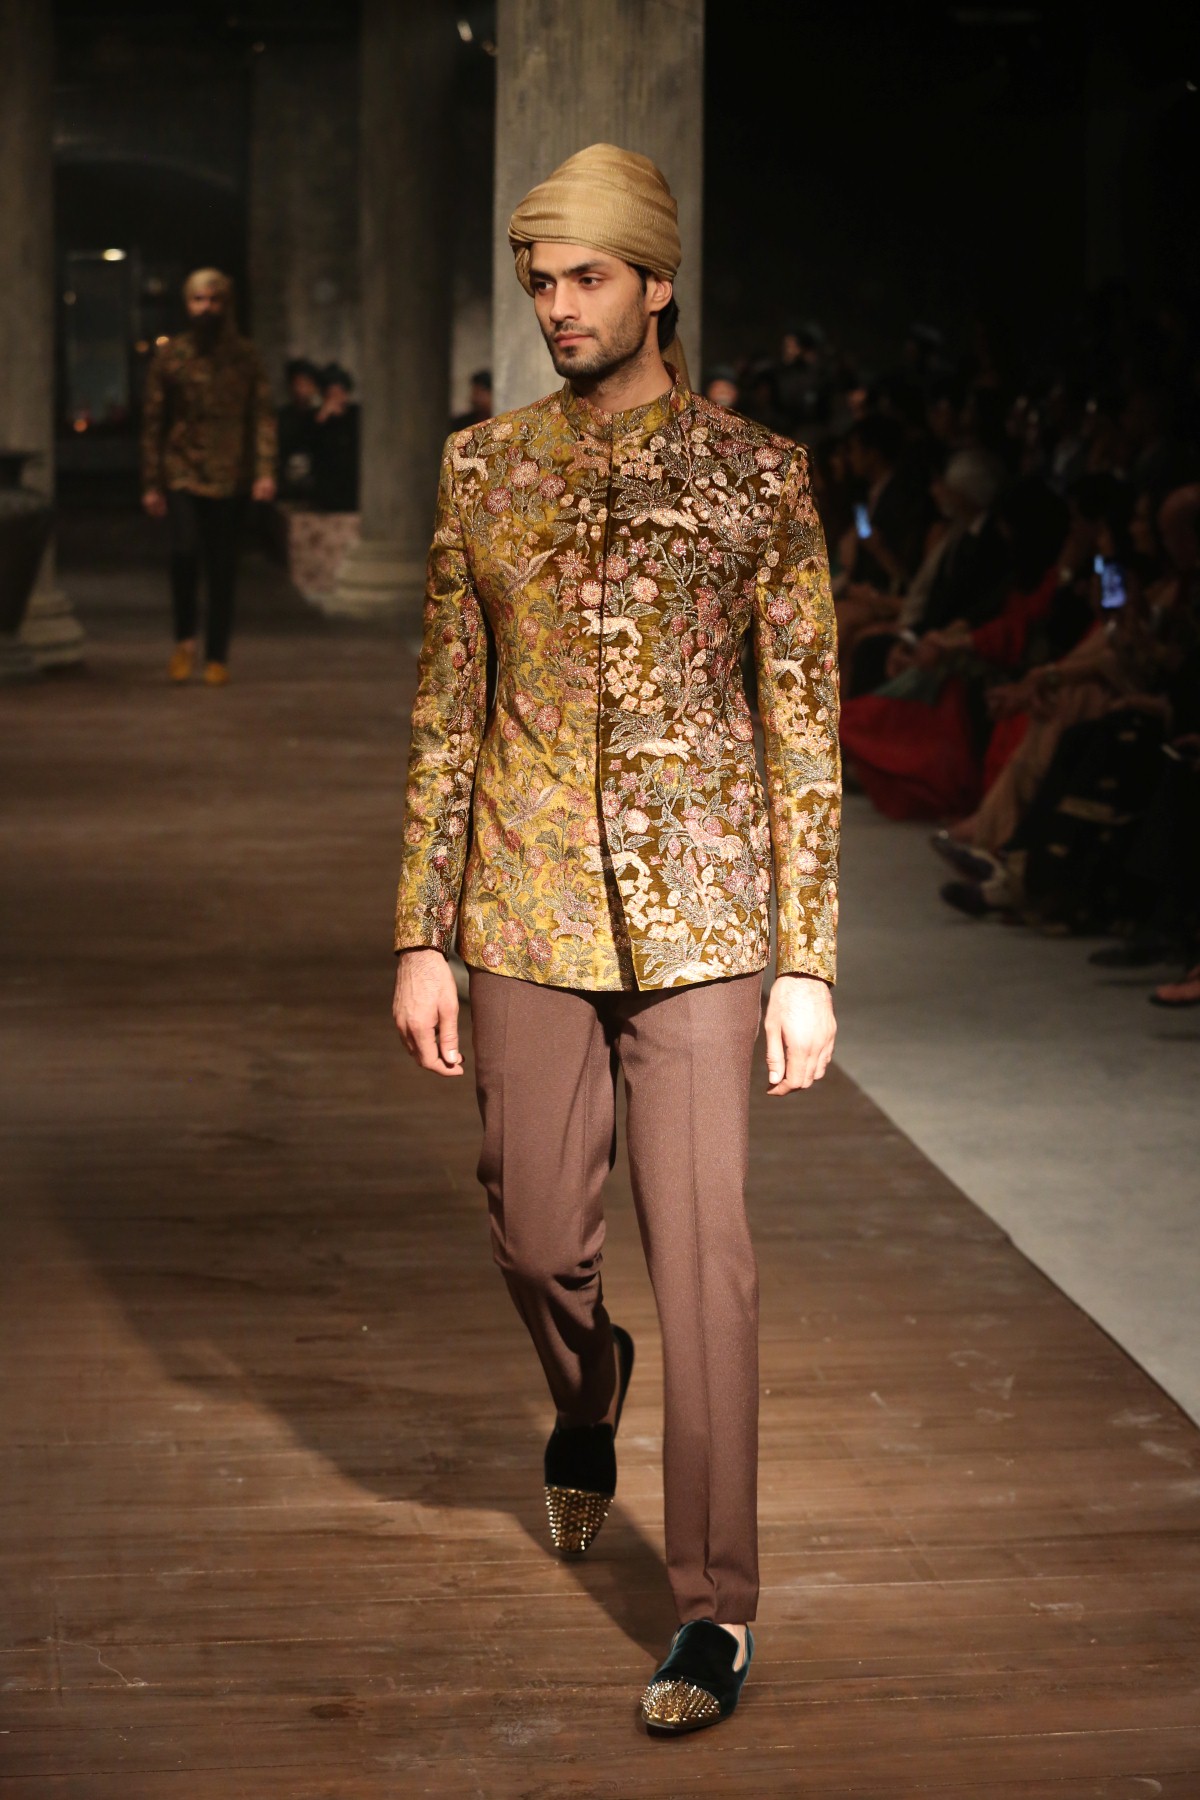 fwd-life-sabyasachi-and-christian-louboutin-ramp-images-for-the-firdaus-collection-and-bespoke-shoes-and-handbags-14